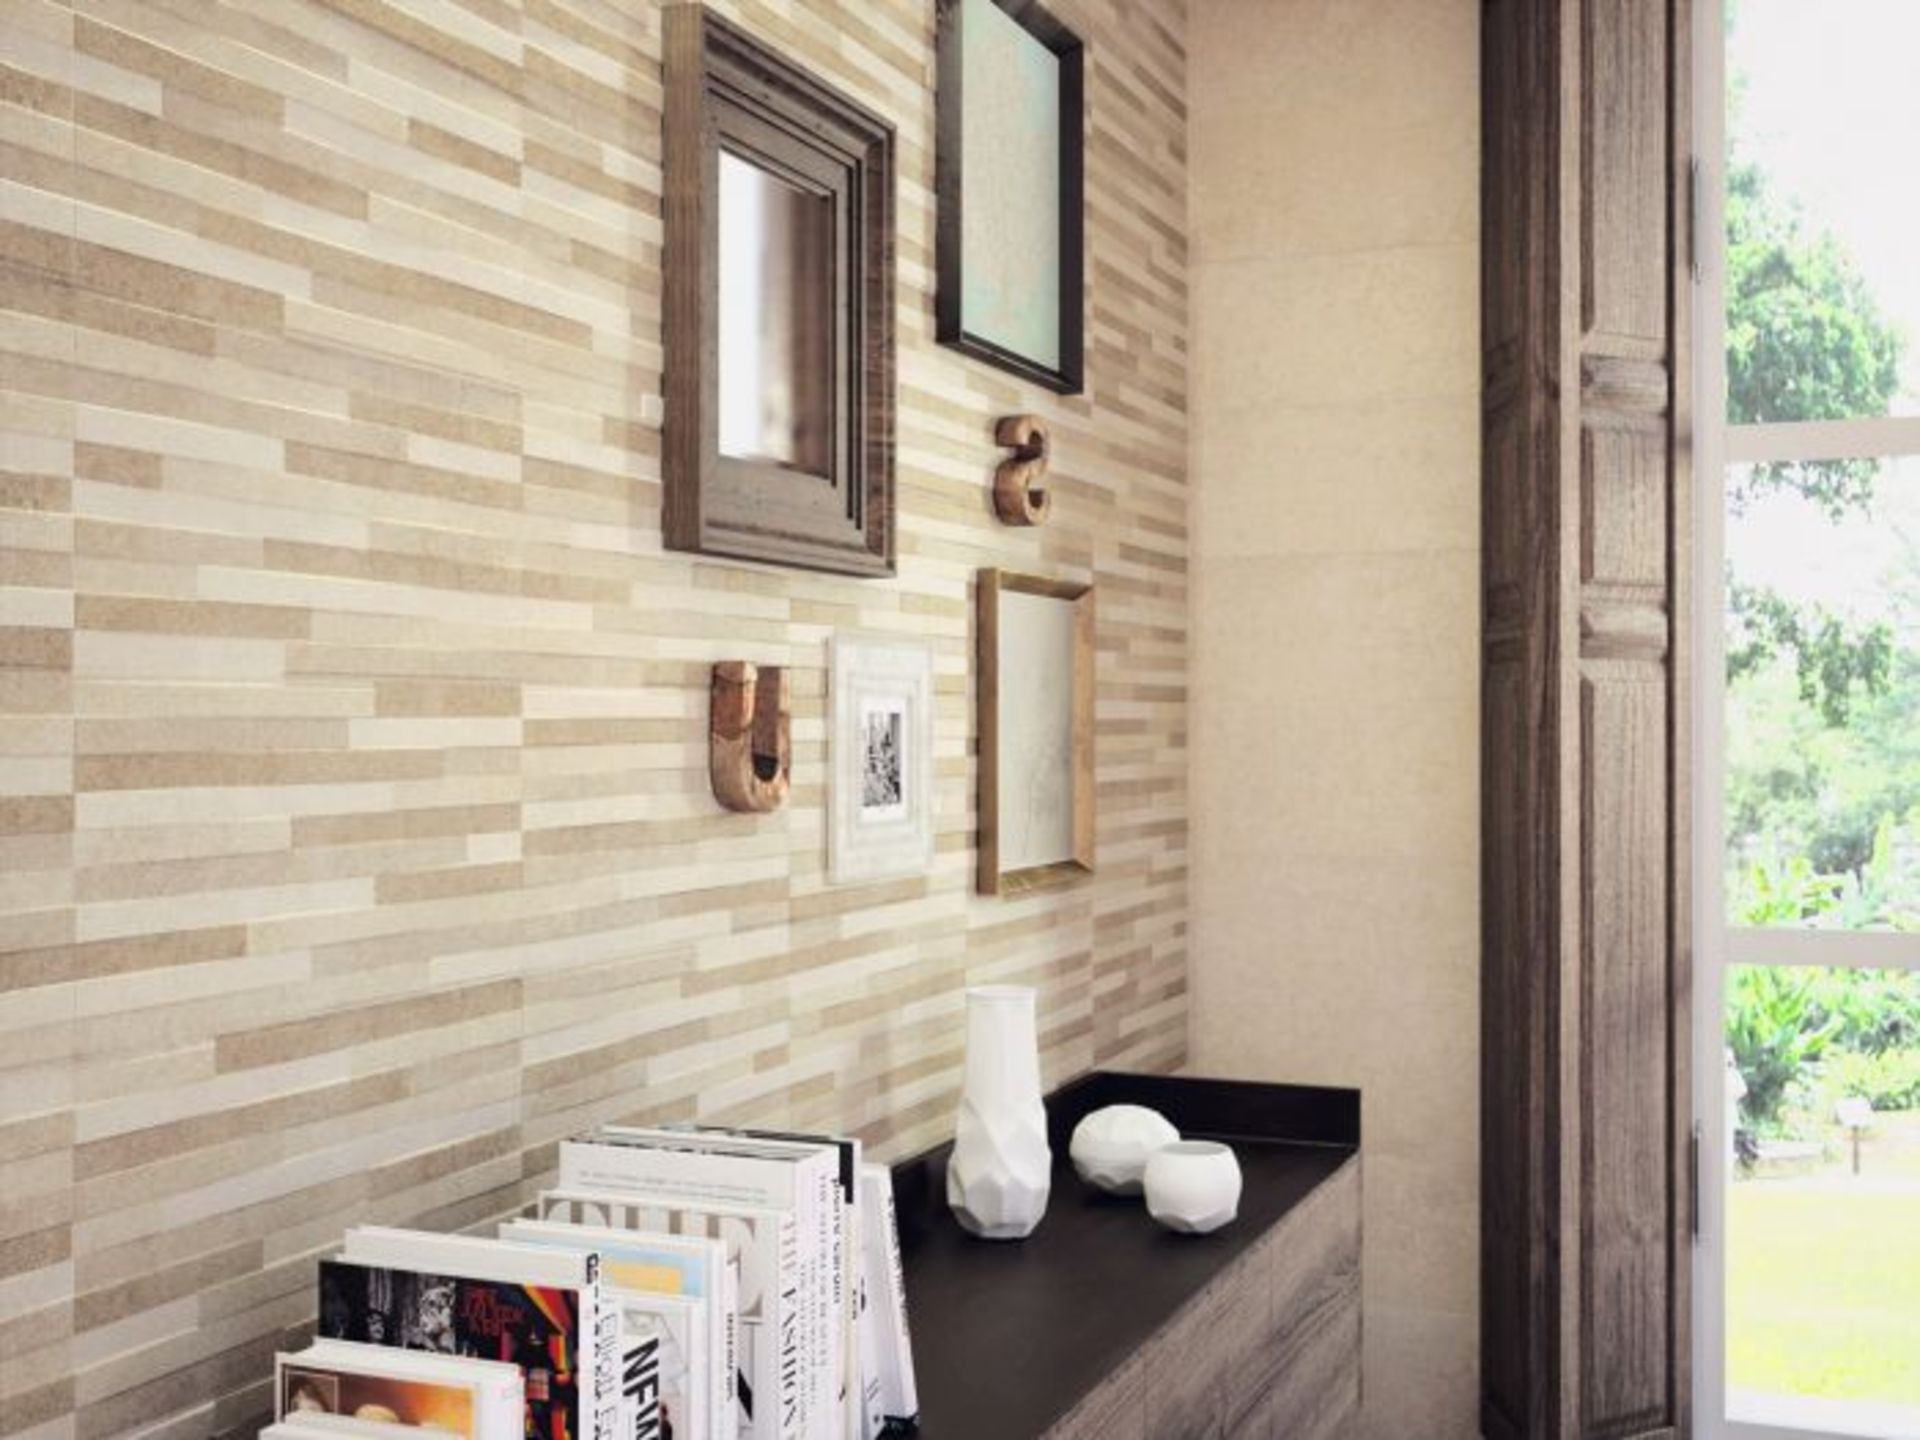 5.4m2 Natural beige stone Splitface effect Wall Tiles. A companion feature tile for the natural... - Image 2 of 4